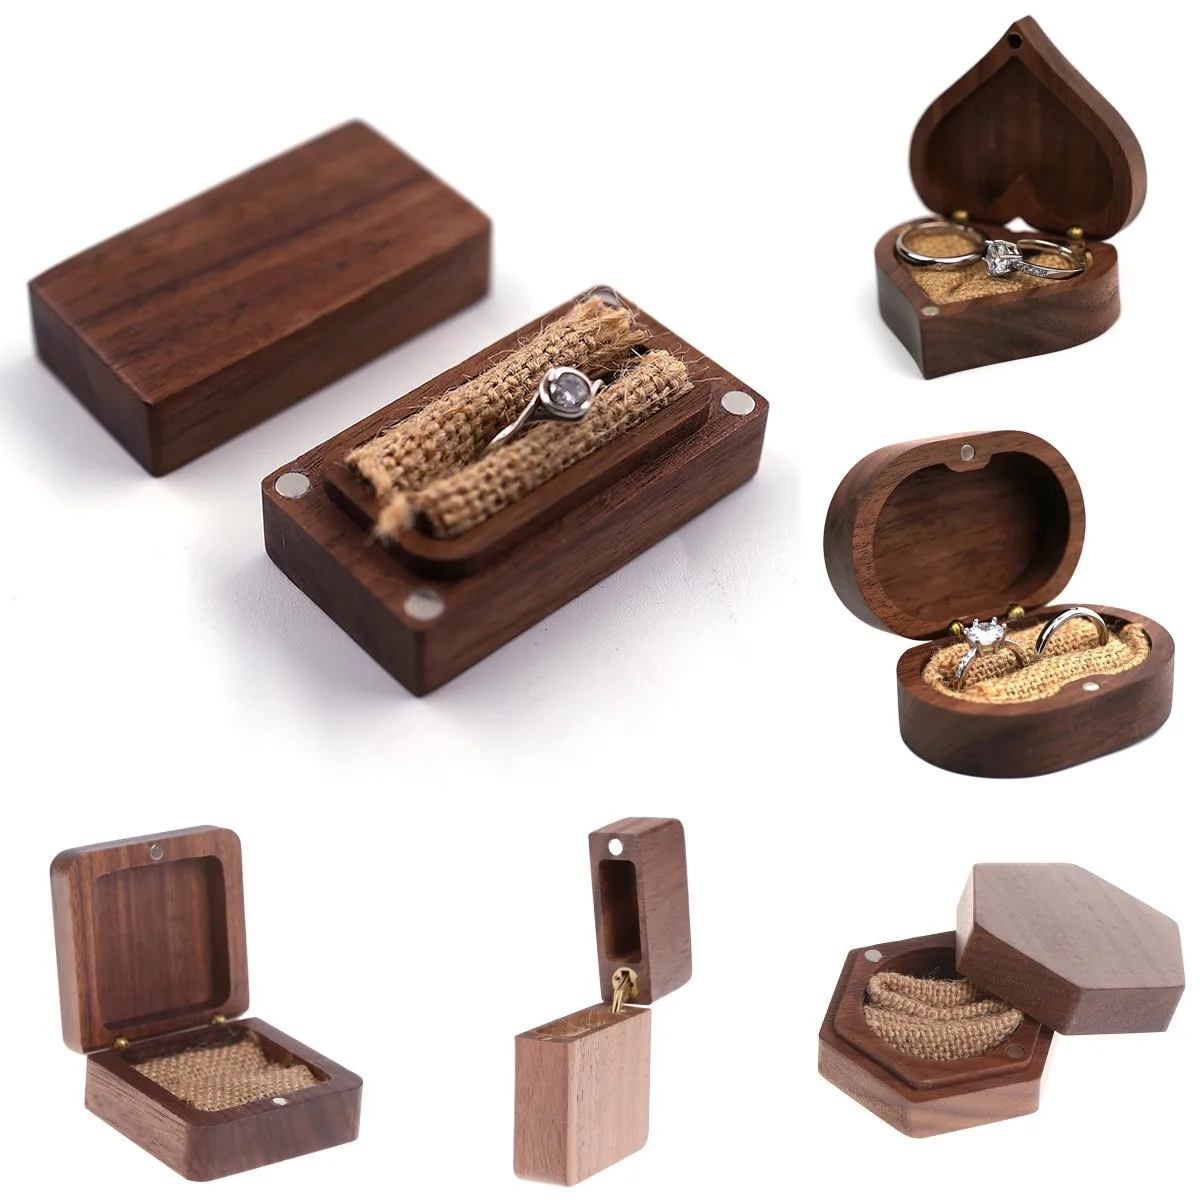 1Pc Wood Engagement Ring Bearer Box Rustic Bride & Groom Wedding Ring Box Pillow Square/Round Gift Wooden Jewelry Box cheap white lace wedding decoration ring pillow coussin alliance bridal ring bearer pillow cushions wedding marriage ceremony